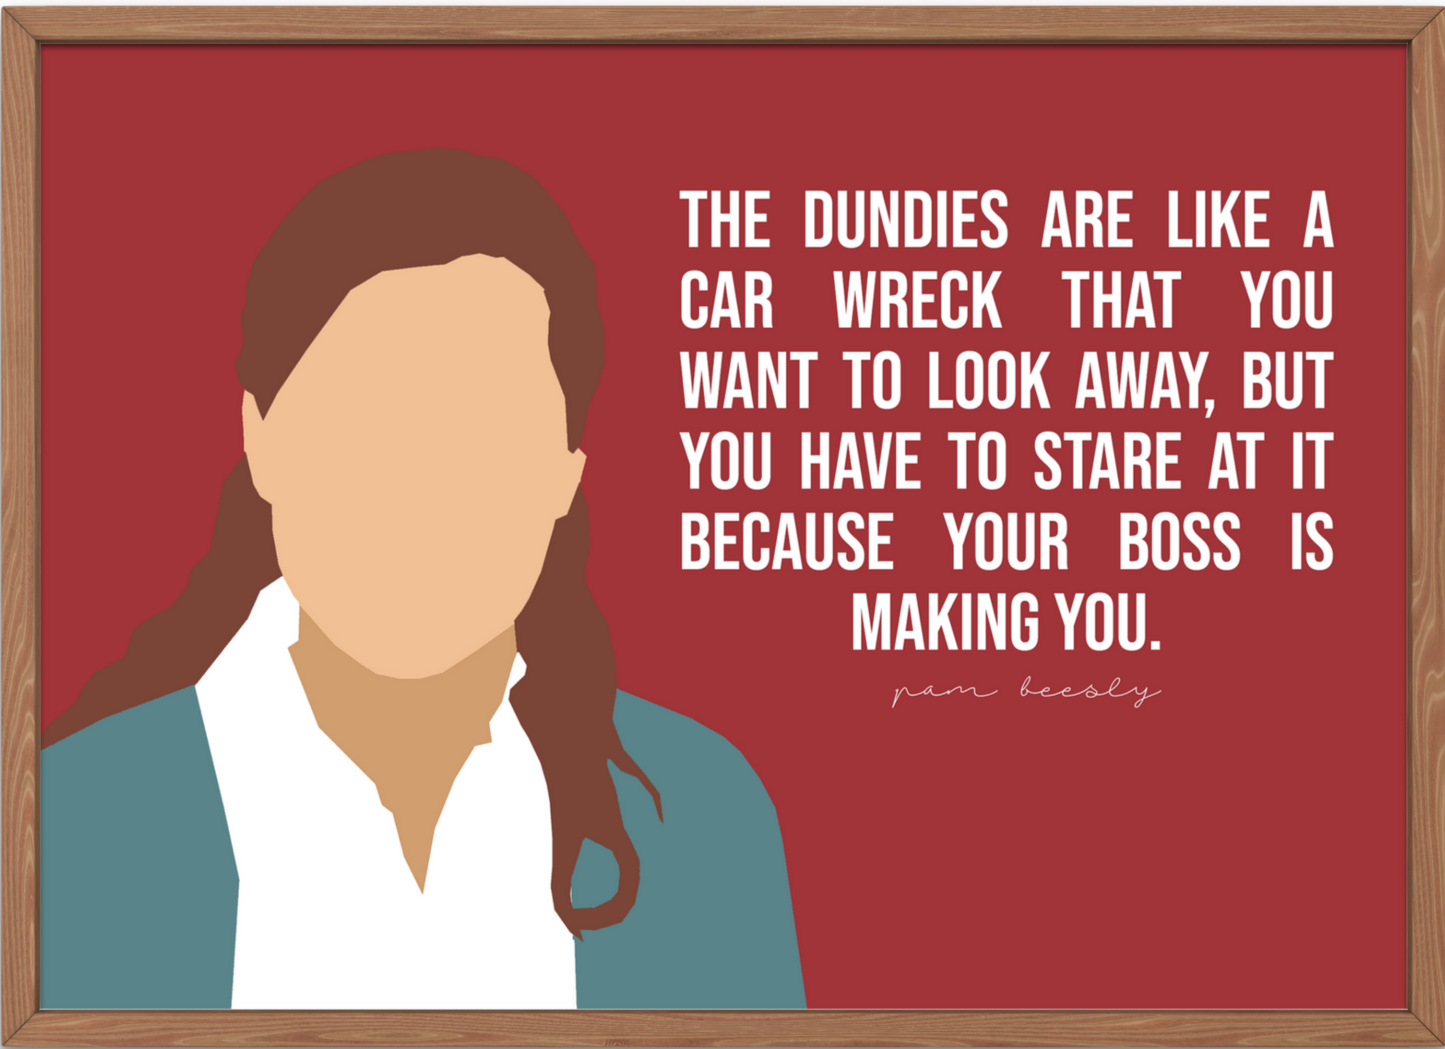 The Office Poster | Dundies are like a car wreck - Pam Beesly